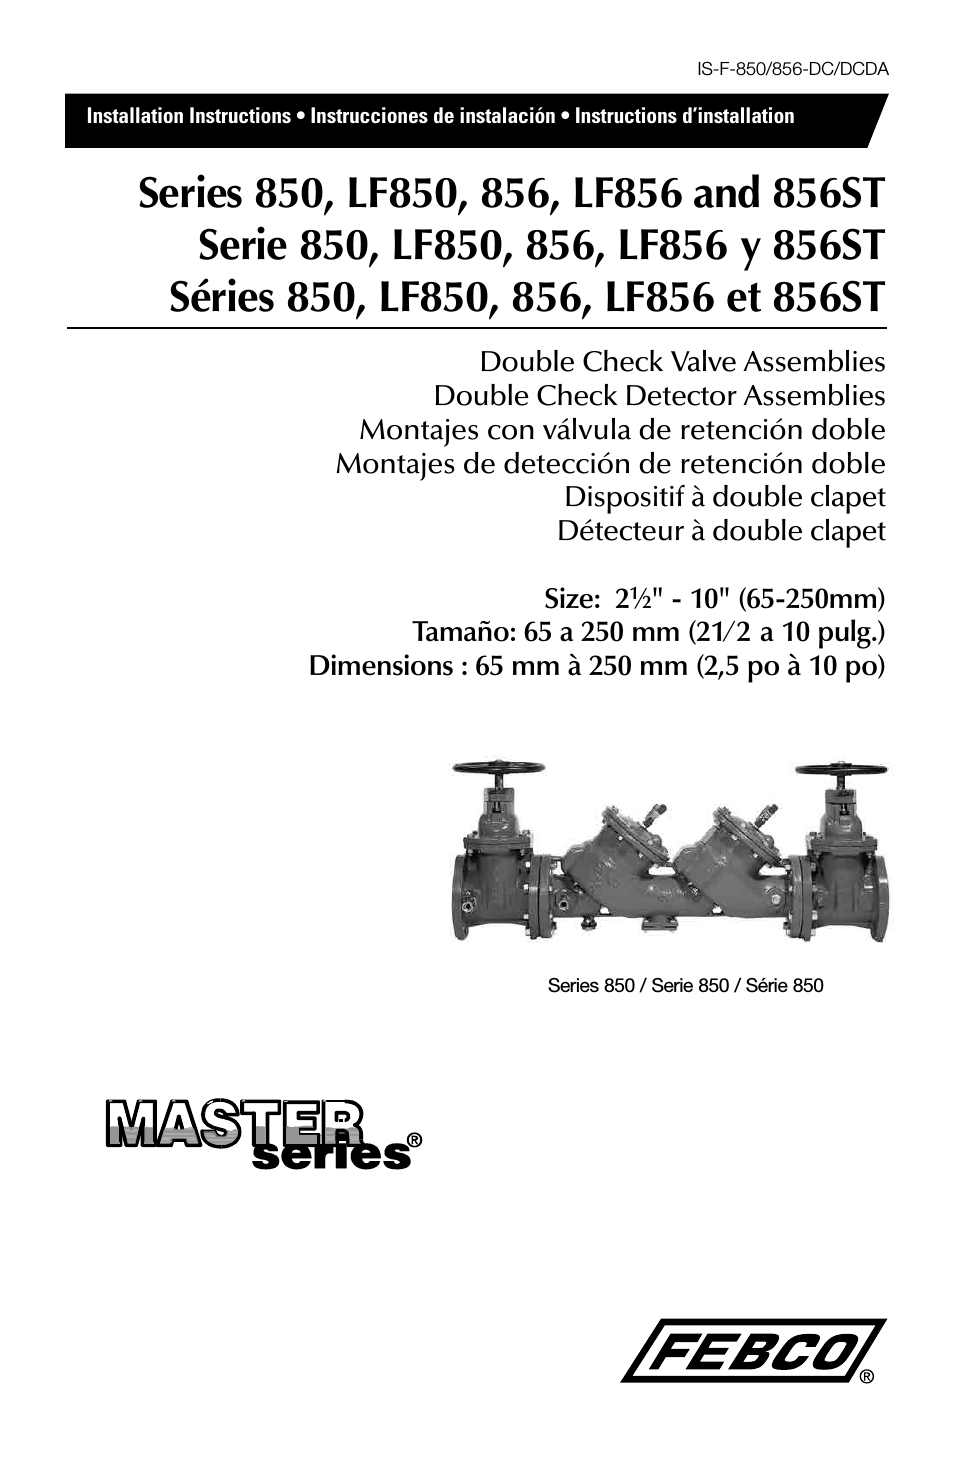 LF856 MasterSeries In-Line Design Double Check Detector Assemblies